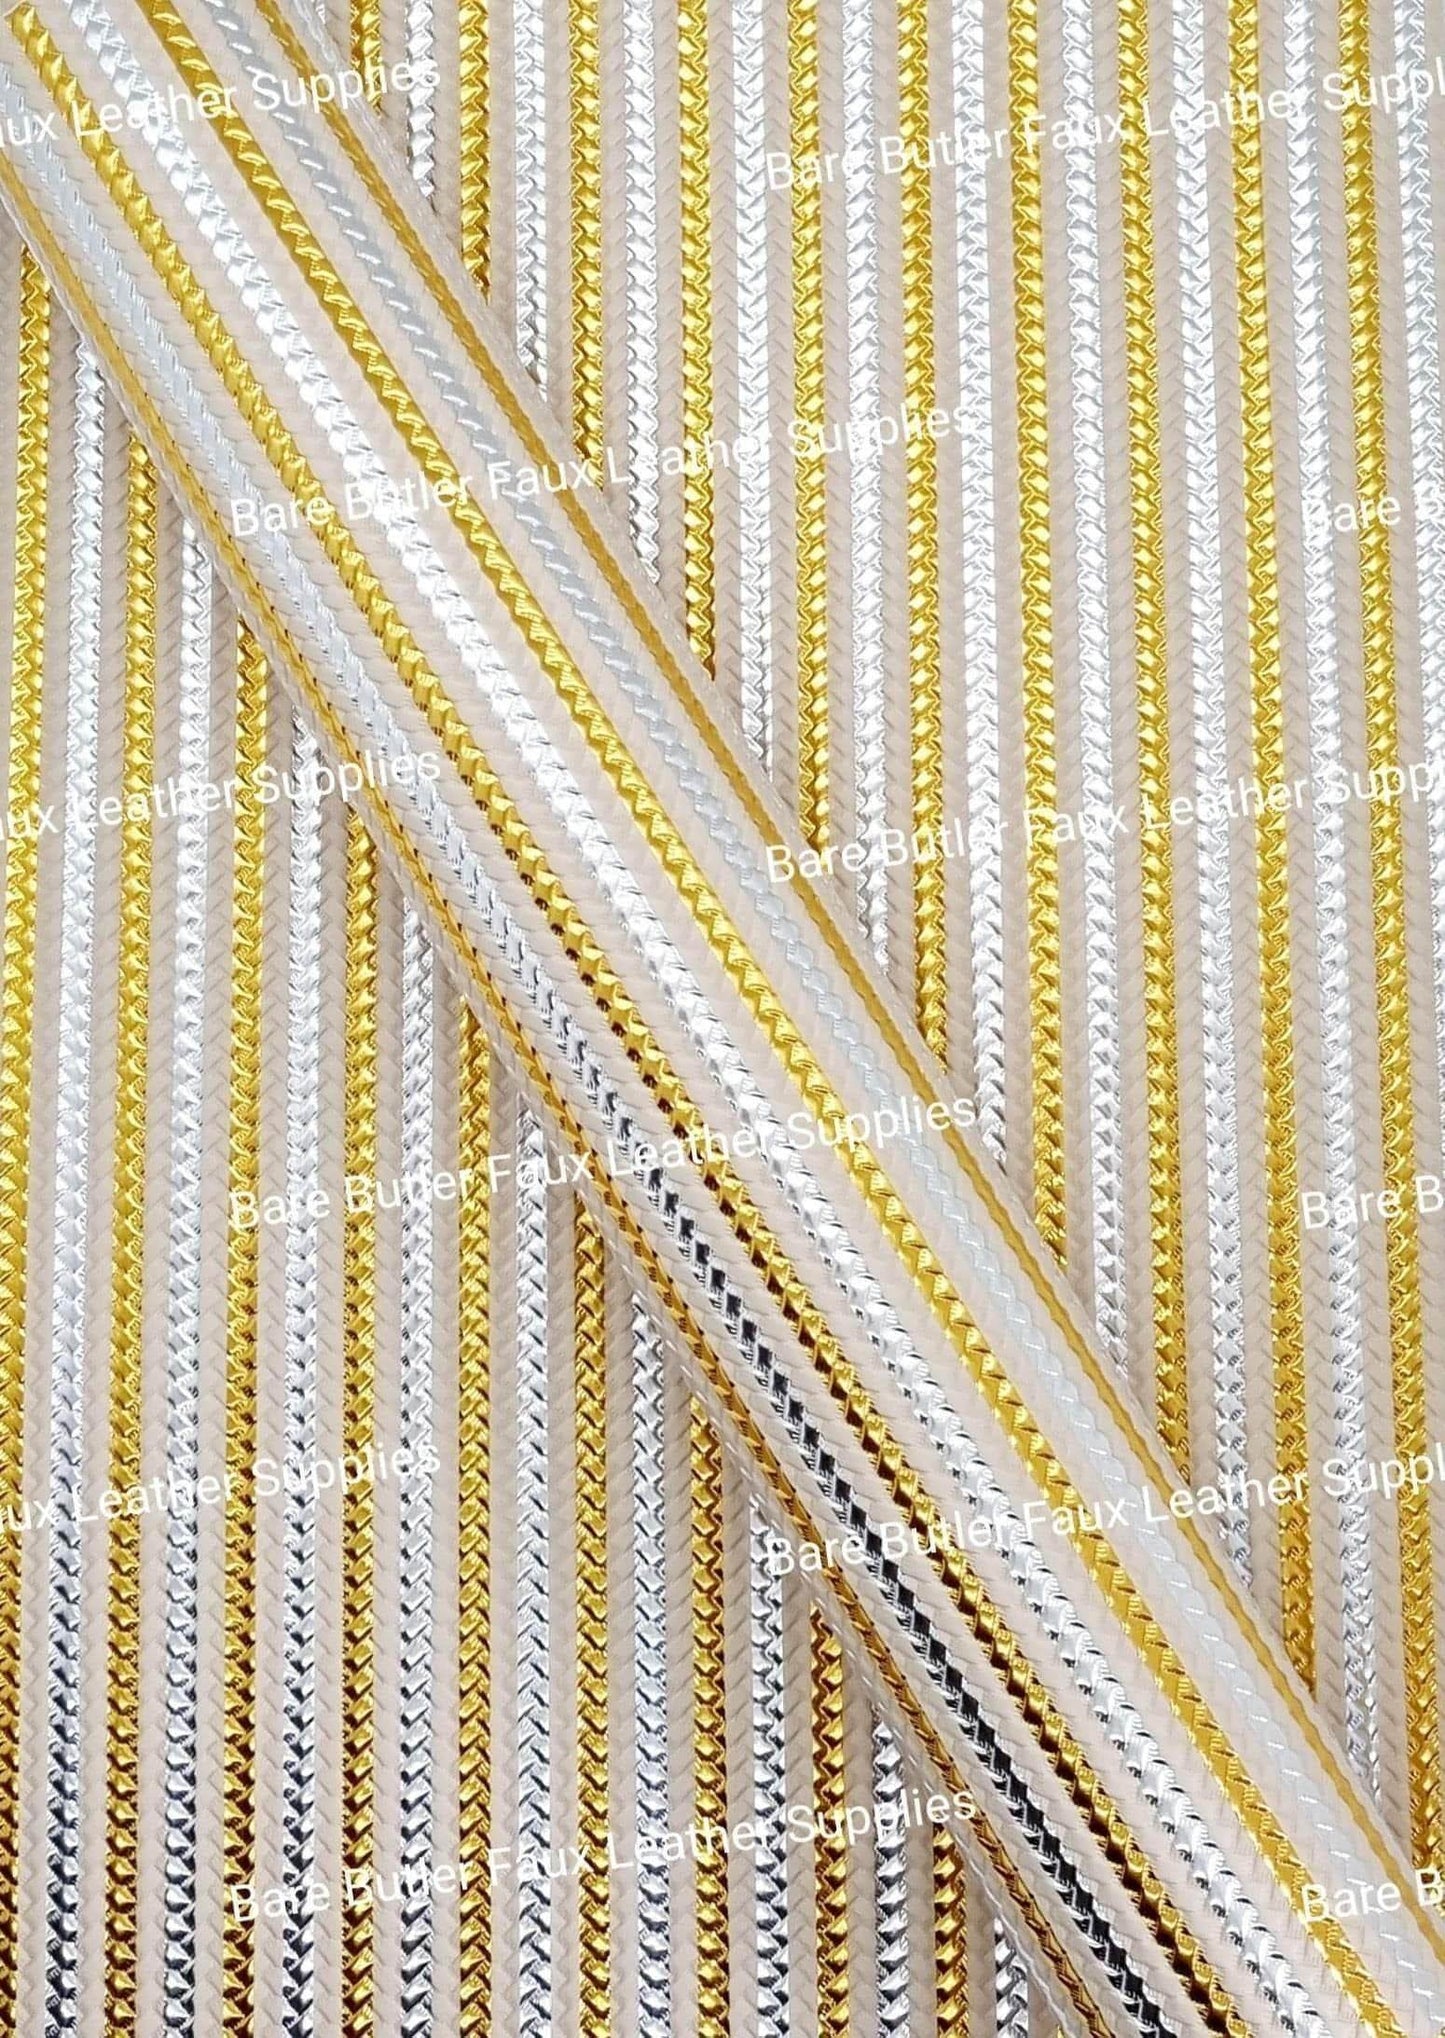 Metallic Embossed Weave White, Silver and Gold - Faux, Faux Leather, Floral, Glitter - Bare Butler Faux Leather Supplies 